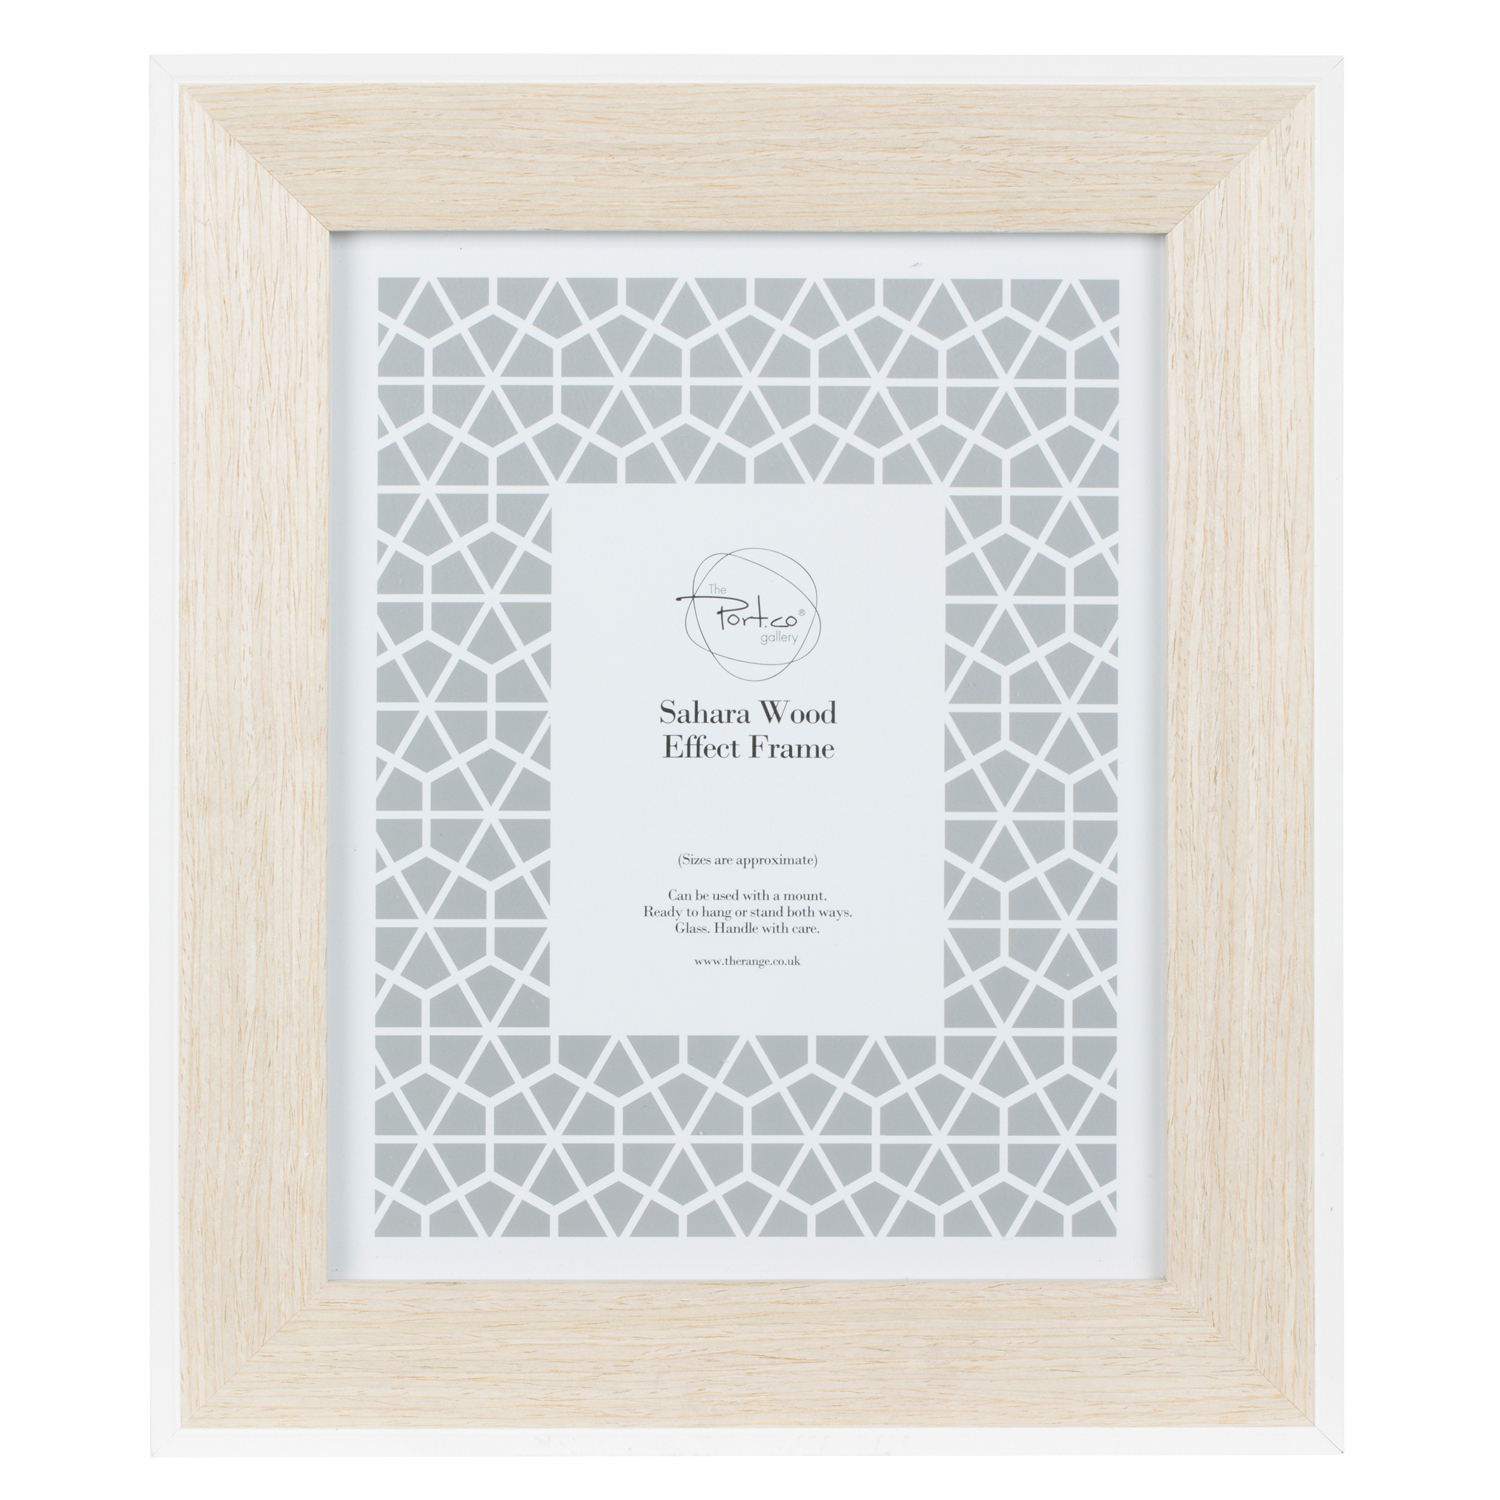 The Port. Co Gallery Sahara White Edge Wood Effect Photo Frame 10 x 8 inch Image 1